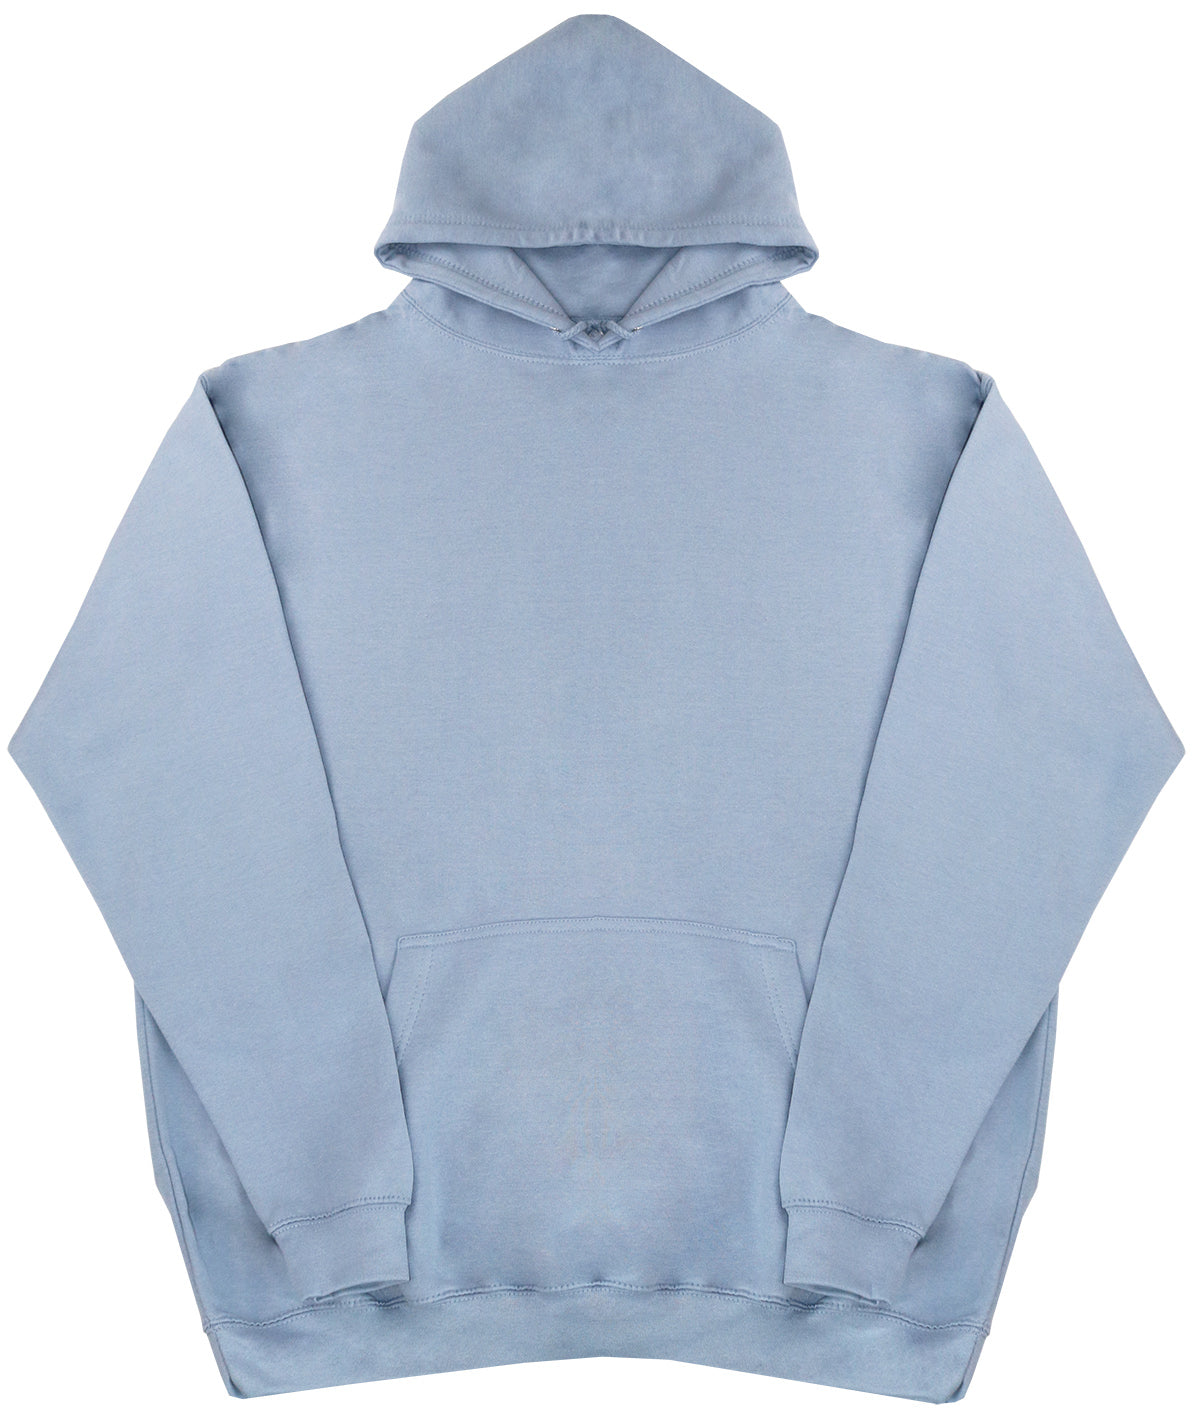 Personalised Original Hoody - Choice of Fonts - White Text - Huge Oversized Comfy